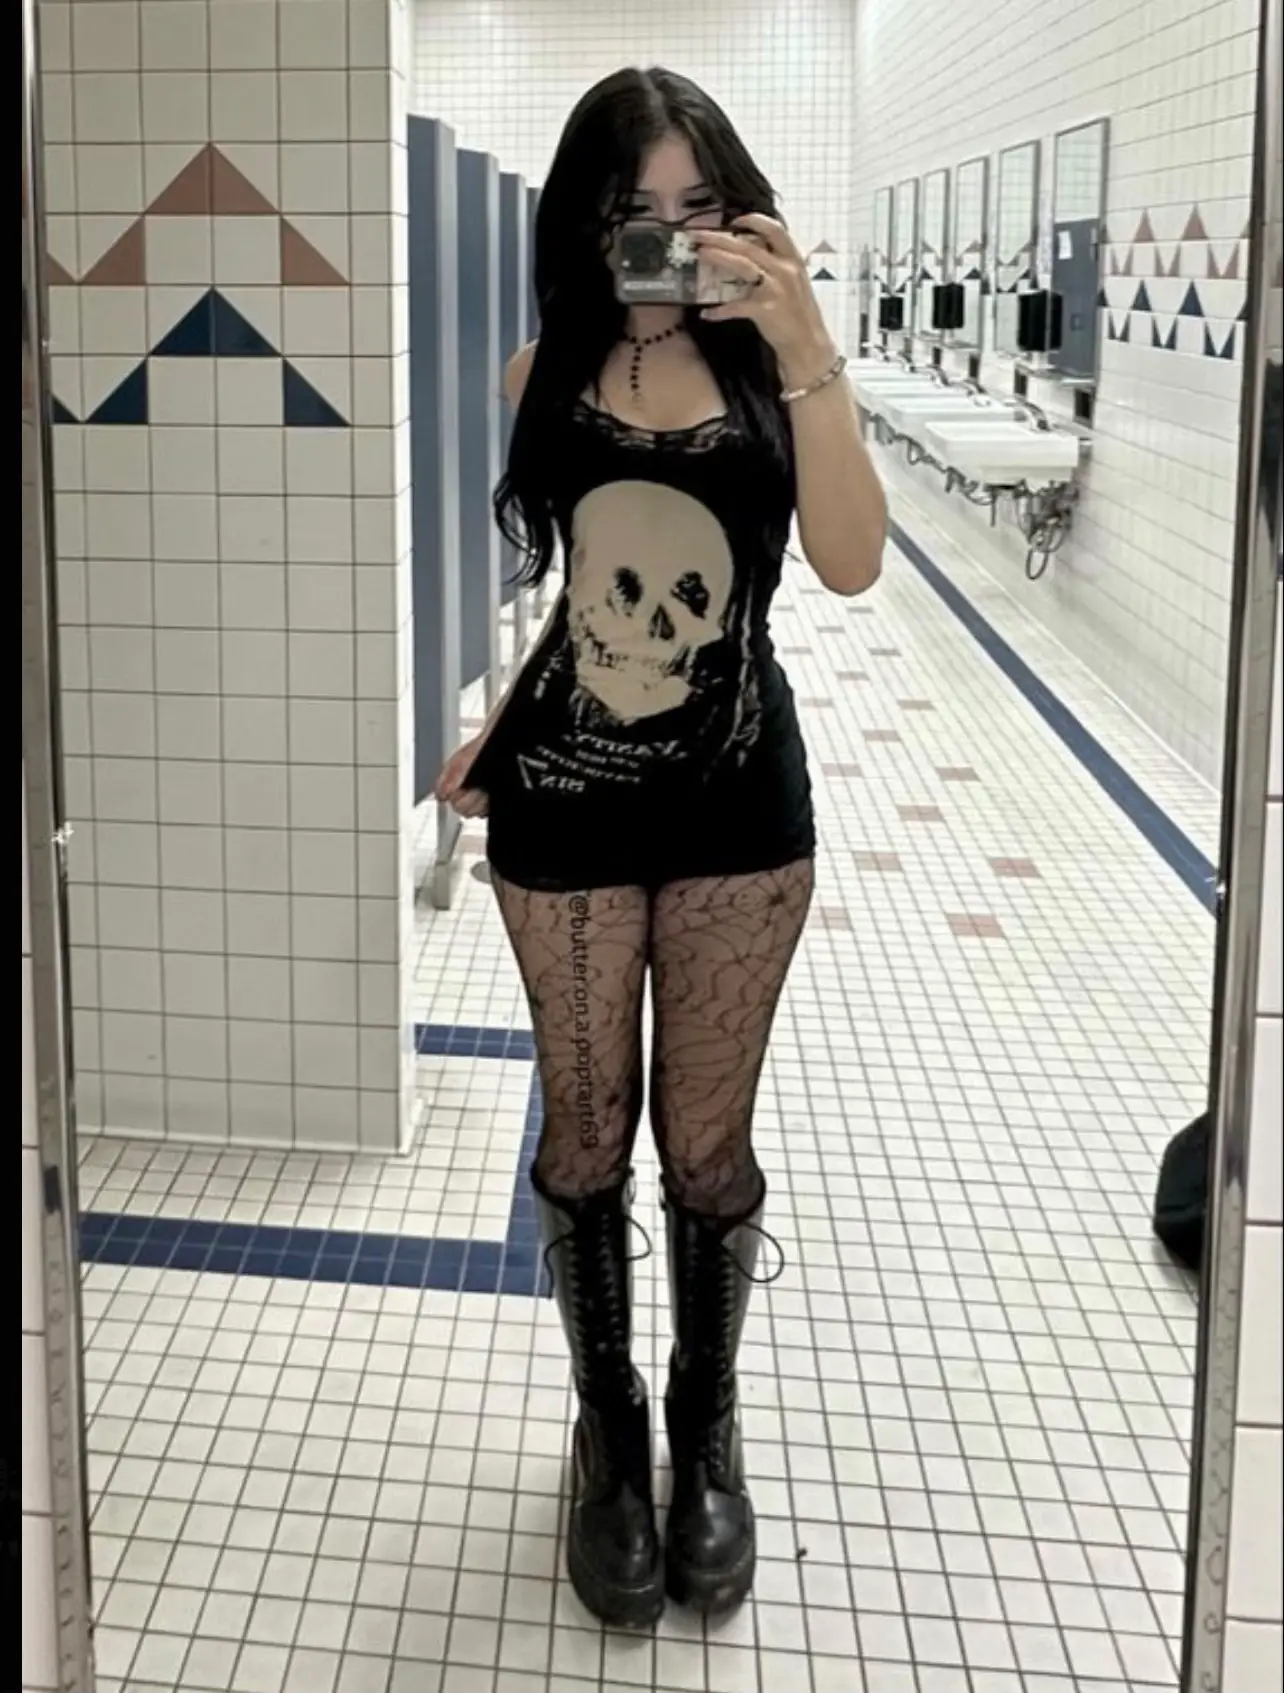 Let's hear it for the white fishnets + black outfit! : r/alternativefashion